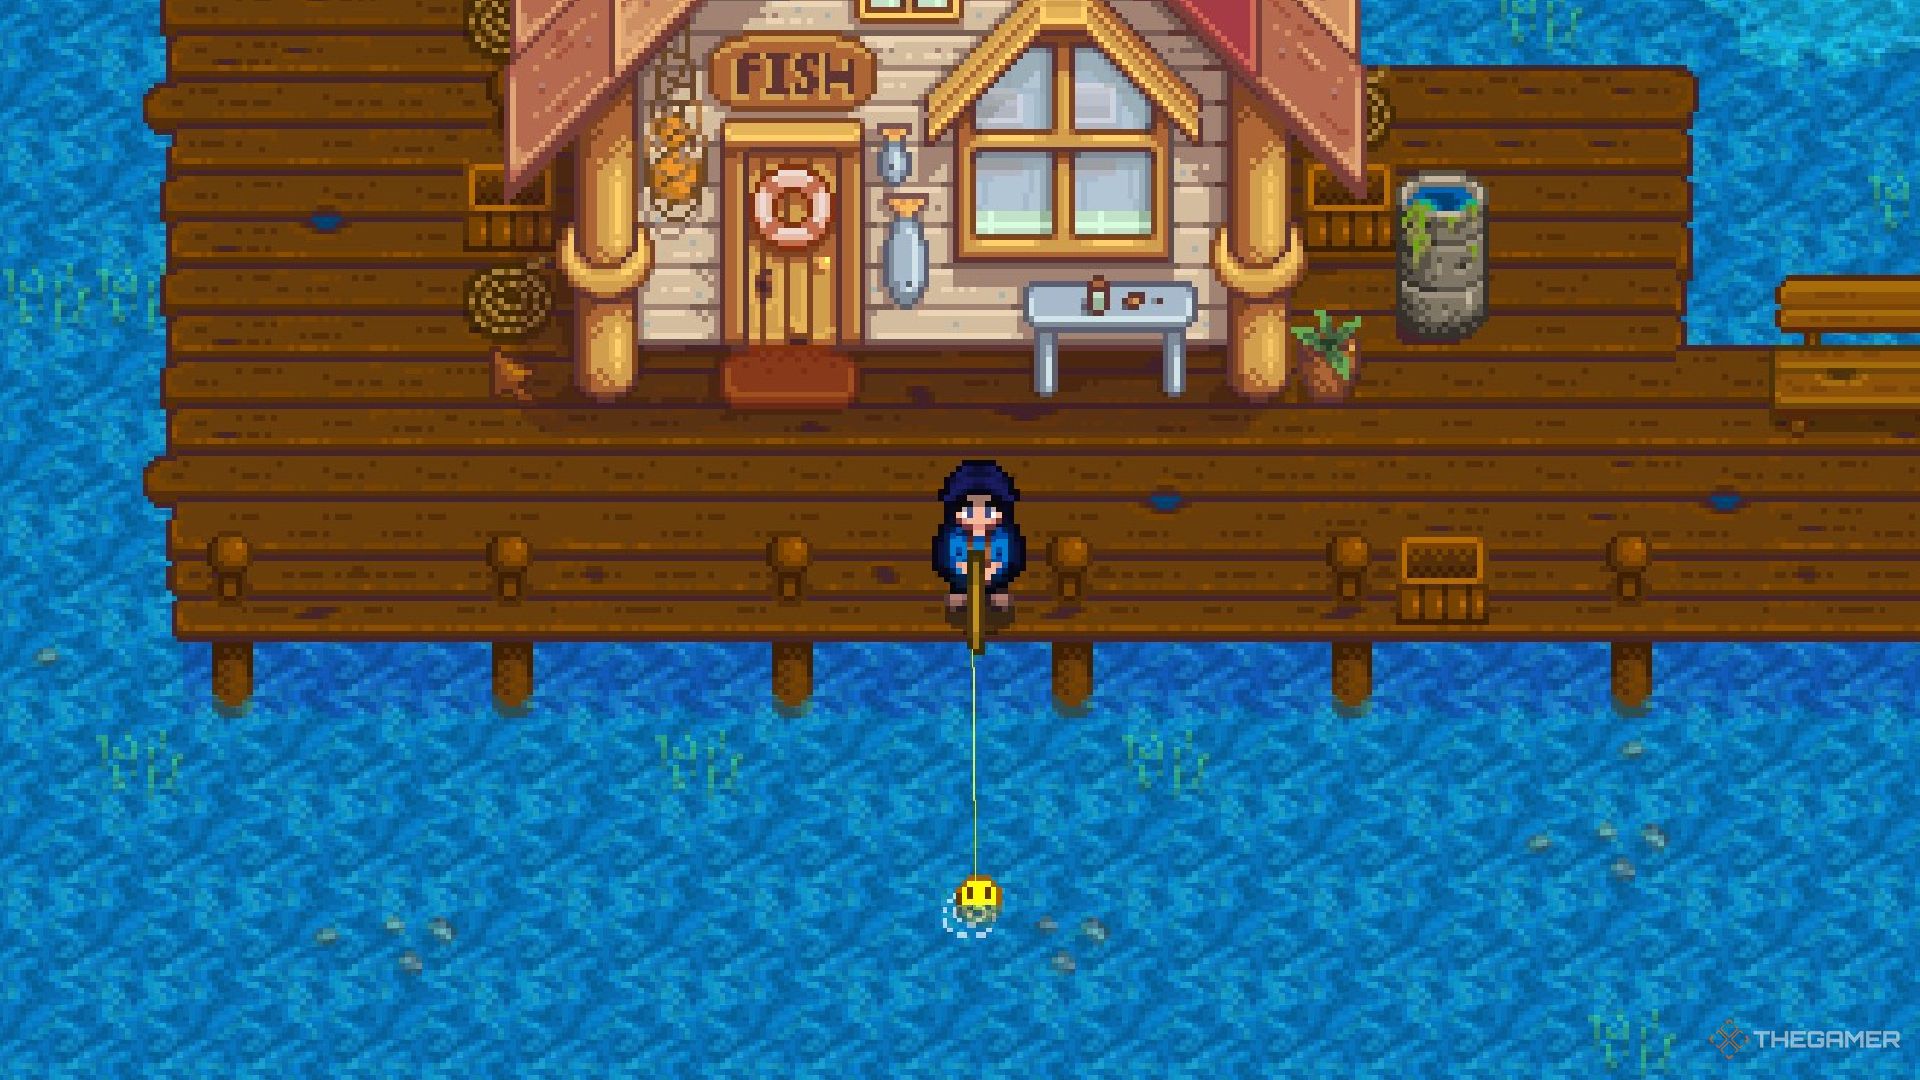 stardew valley player fishing with smiley face bobber and no UI